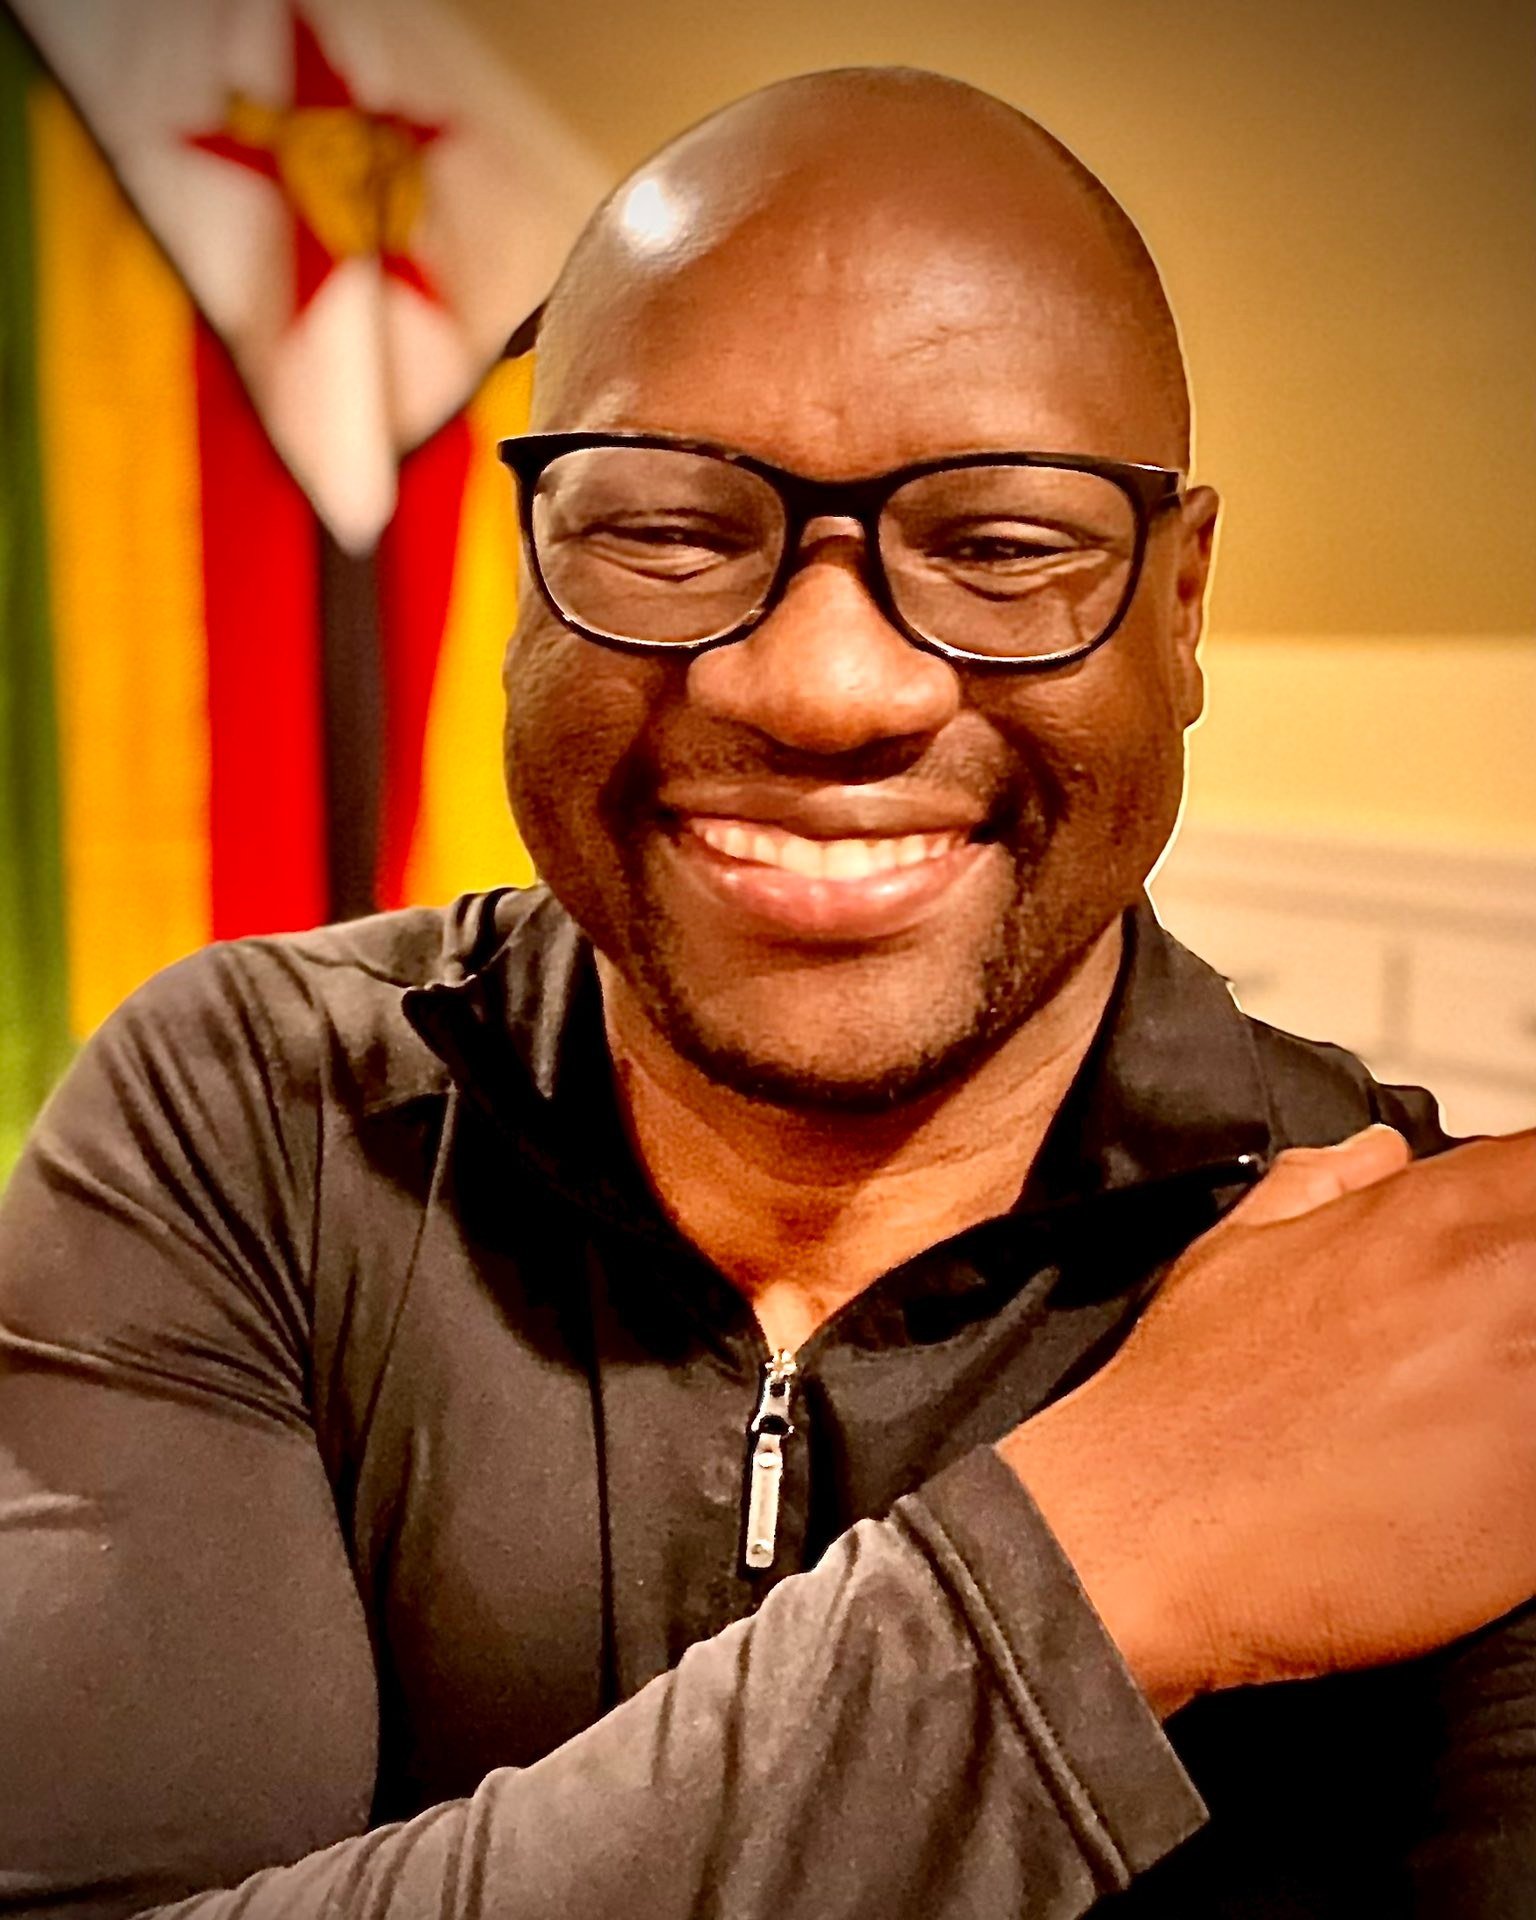 Pastor Evan Mawarire&rsquo;s life dramatically changed in 2016, after he became the accidental leader of a citizens&rsquo; movement in Zimbabwe that challenged the rule of Robert Mugabe&rsquo;s government. 

His leadership brought the entire country 